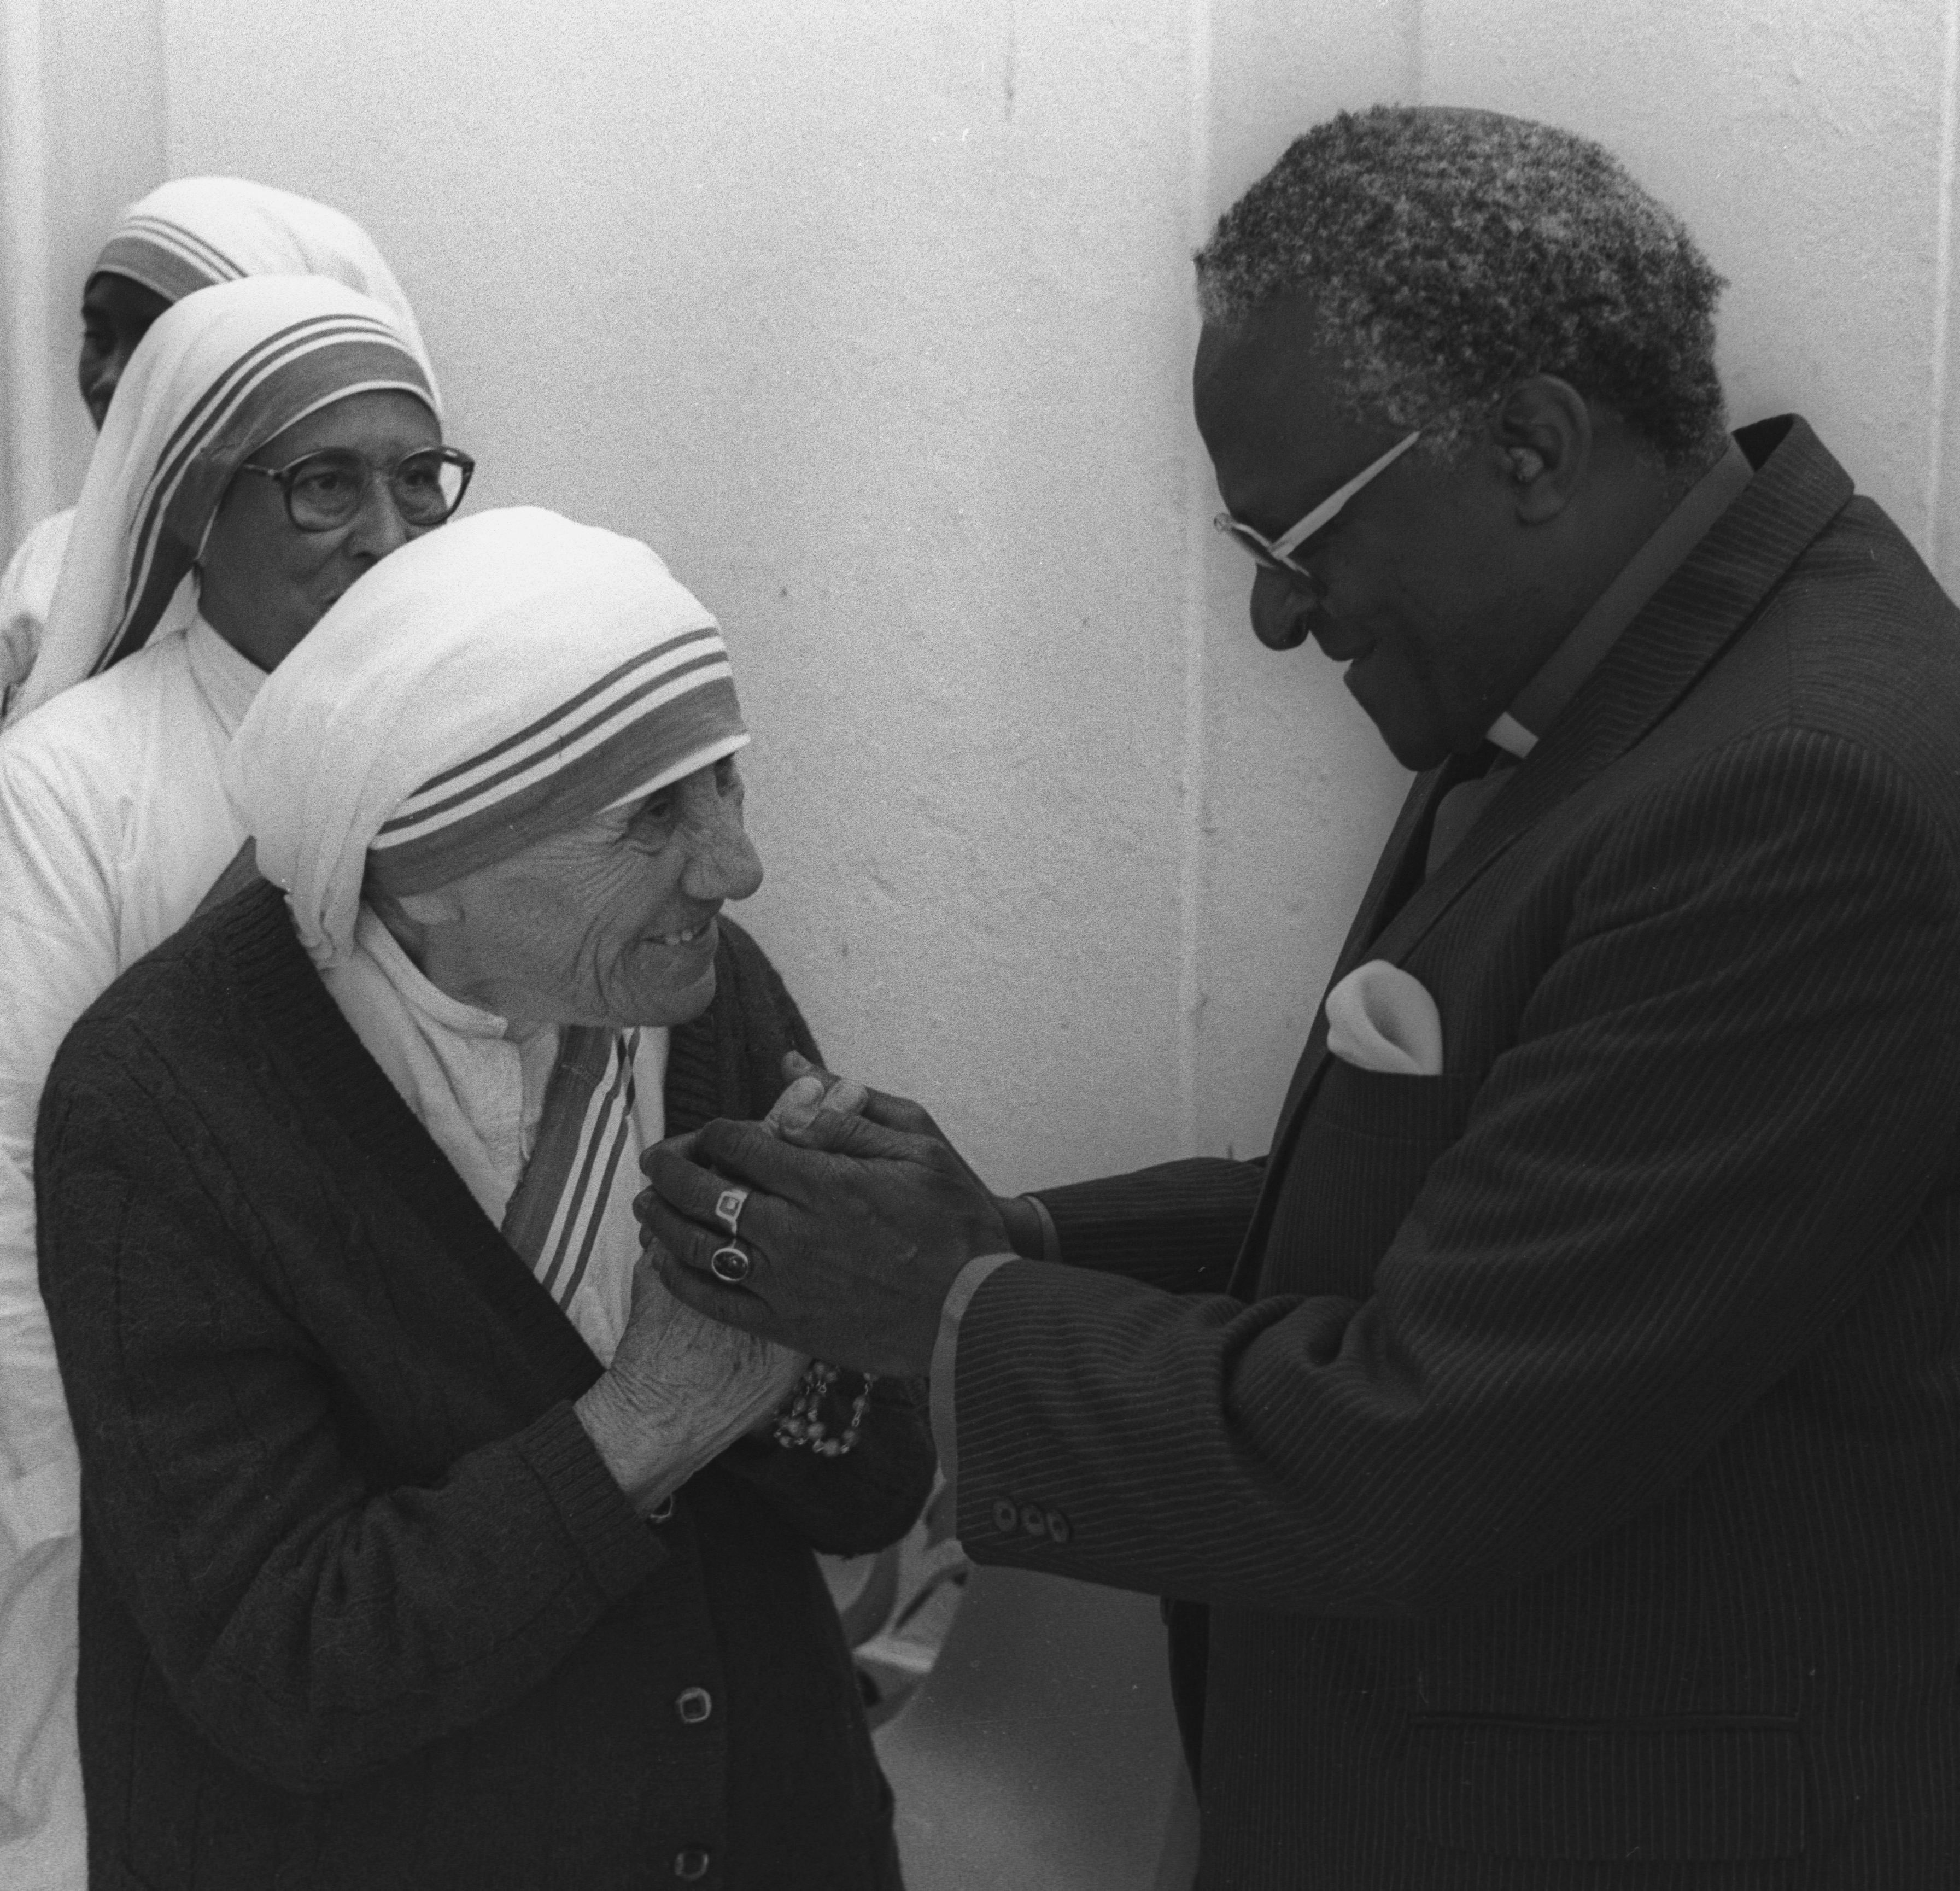 Nobel Peace Price winners Mother Teresa of Calcutta and Archbishop Desmond Tutu meet prior to a lunch in Cape Town, South Africa on November 10, 1988.  Mother Teresa is in Cape Town to open a House of Charity in a black township here.  REUTERS/Ulli Michel